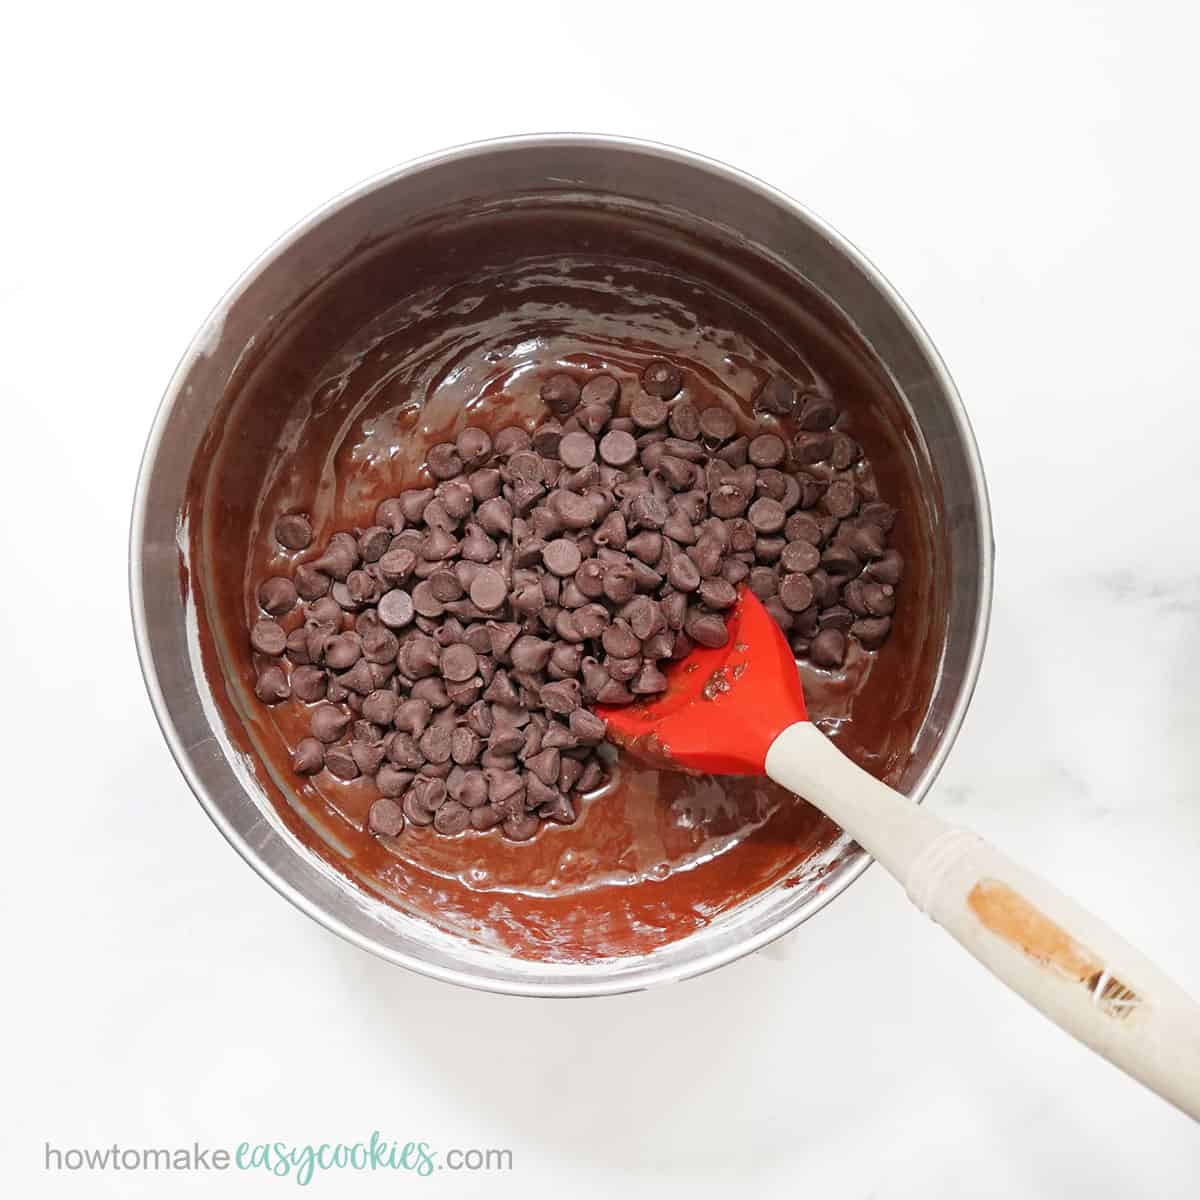 mixing chocolate chips into brownies batter